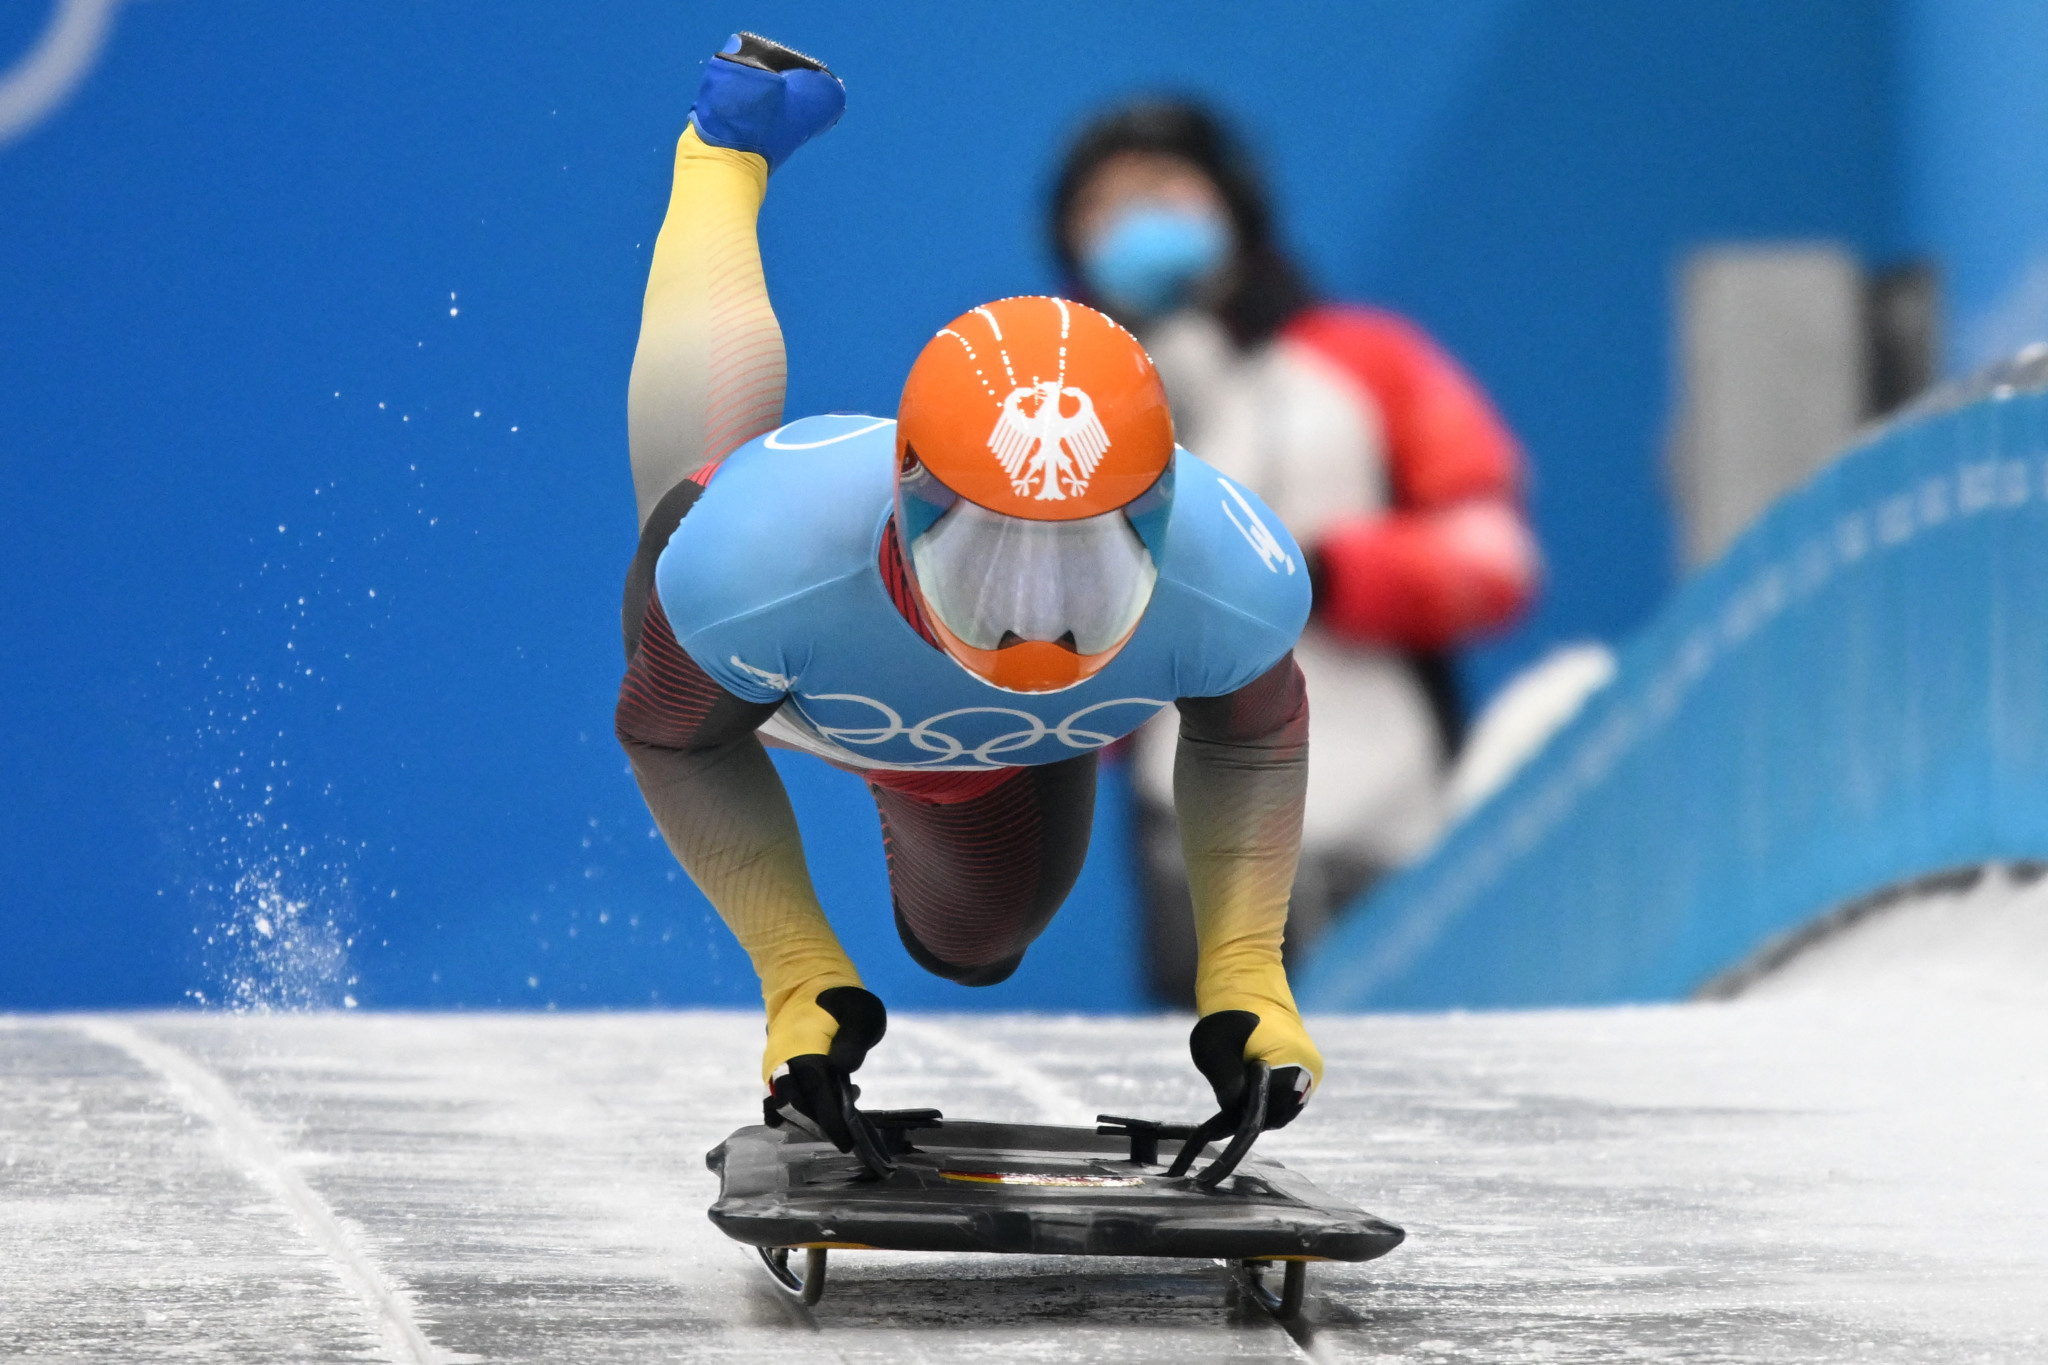 Germany won their first Olympic skeleton gold medals at the Beijing 2022 Winter Olympics ©Getty Images